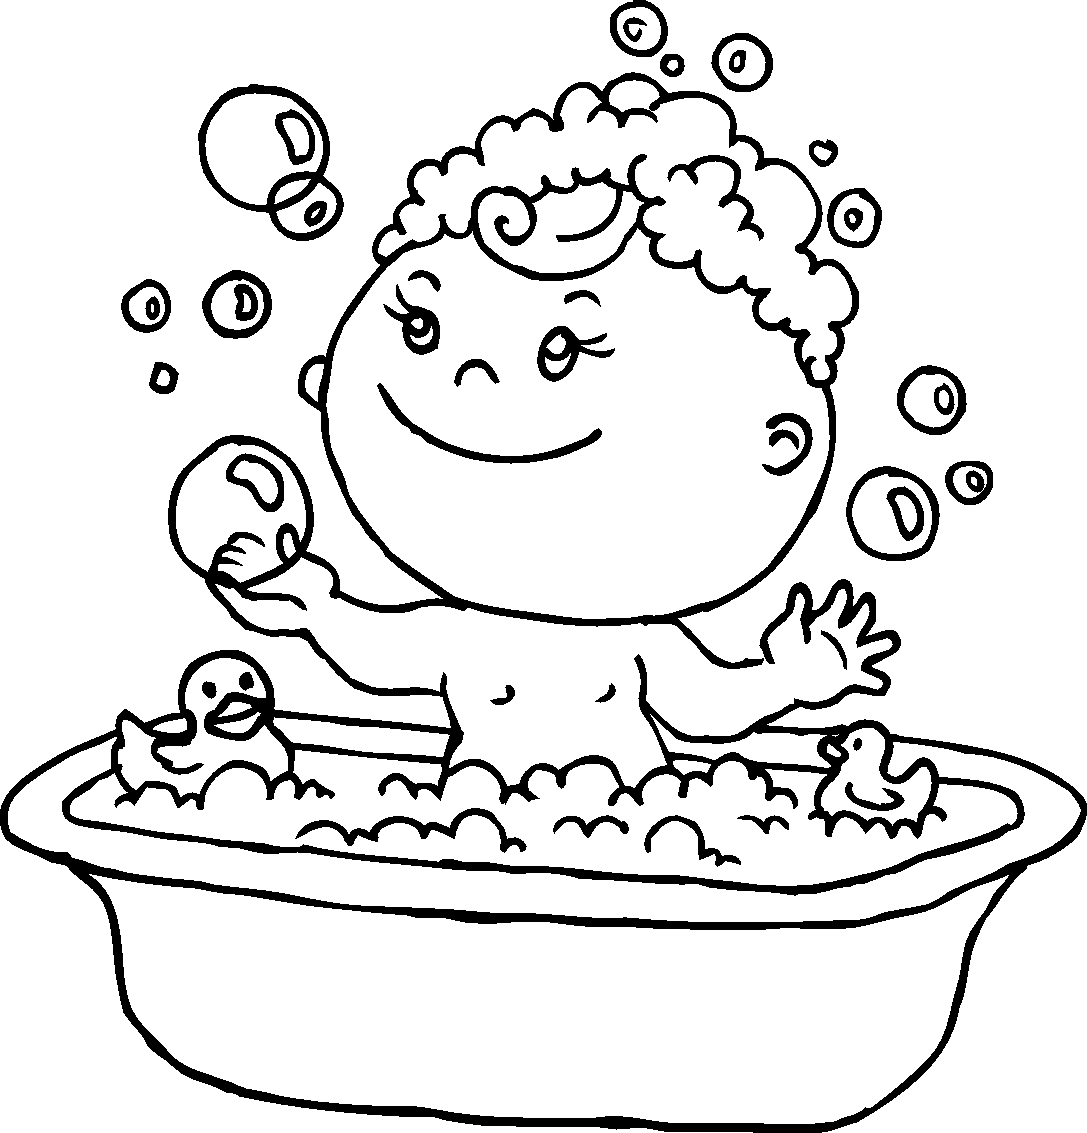 Rubber Duck Coloring Pages - Best Coloring Pages For Kids